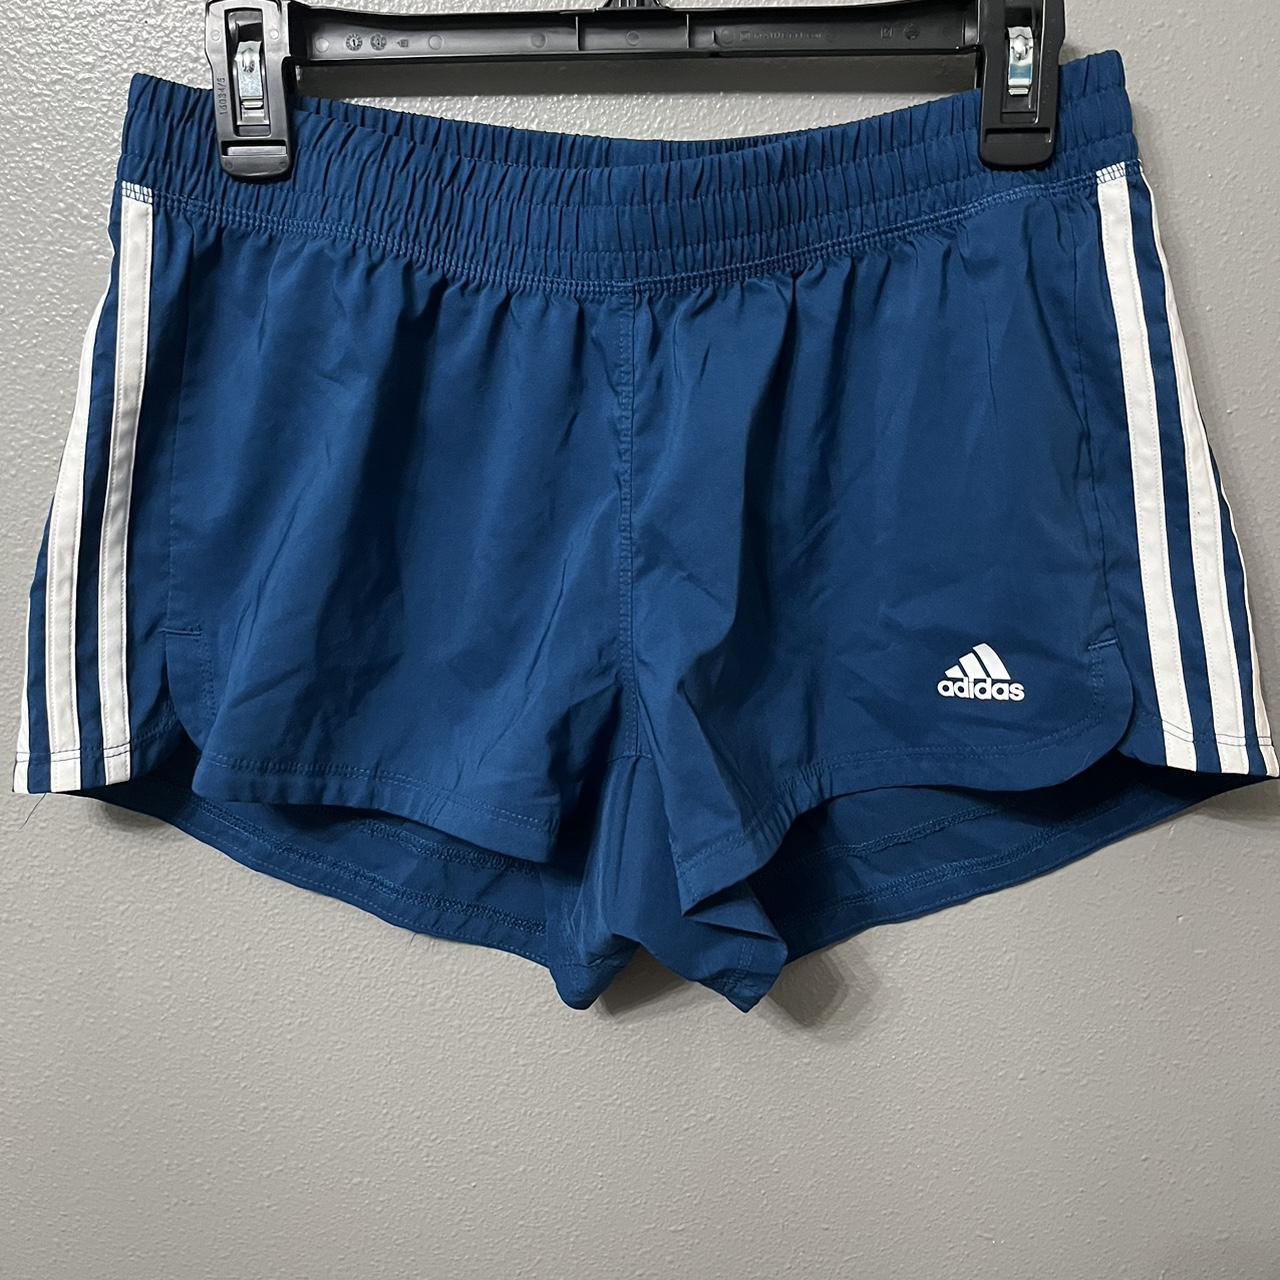 Adidas Women's Blue and White Shorts